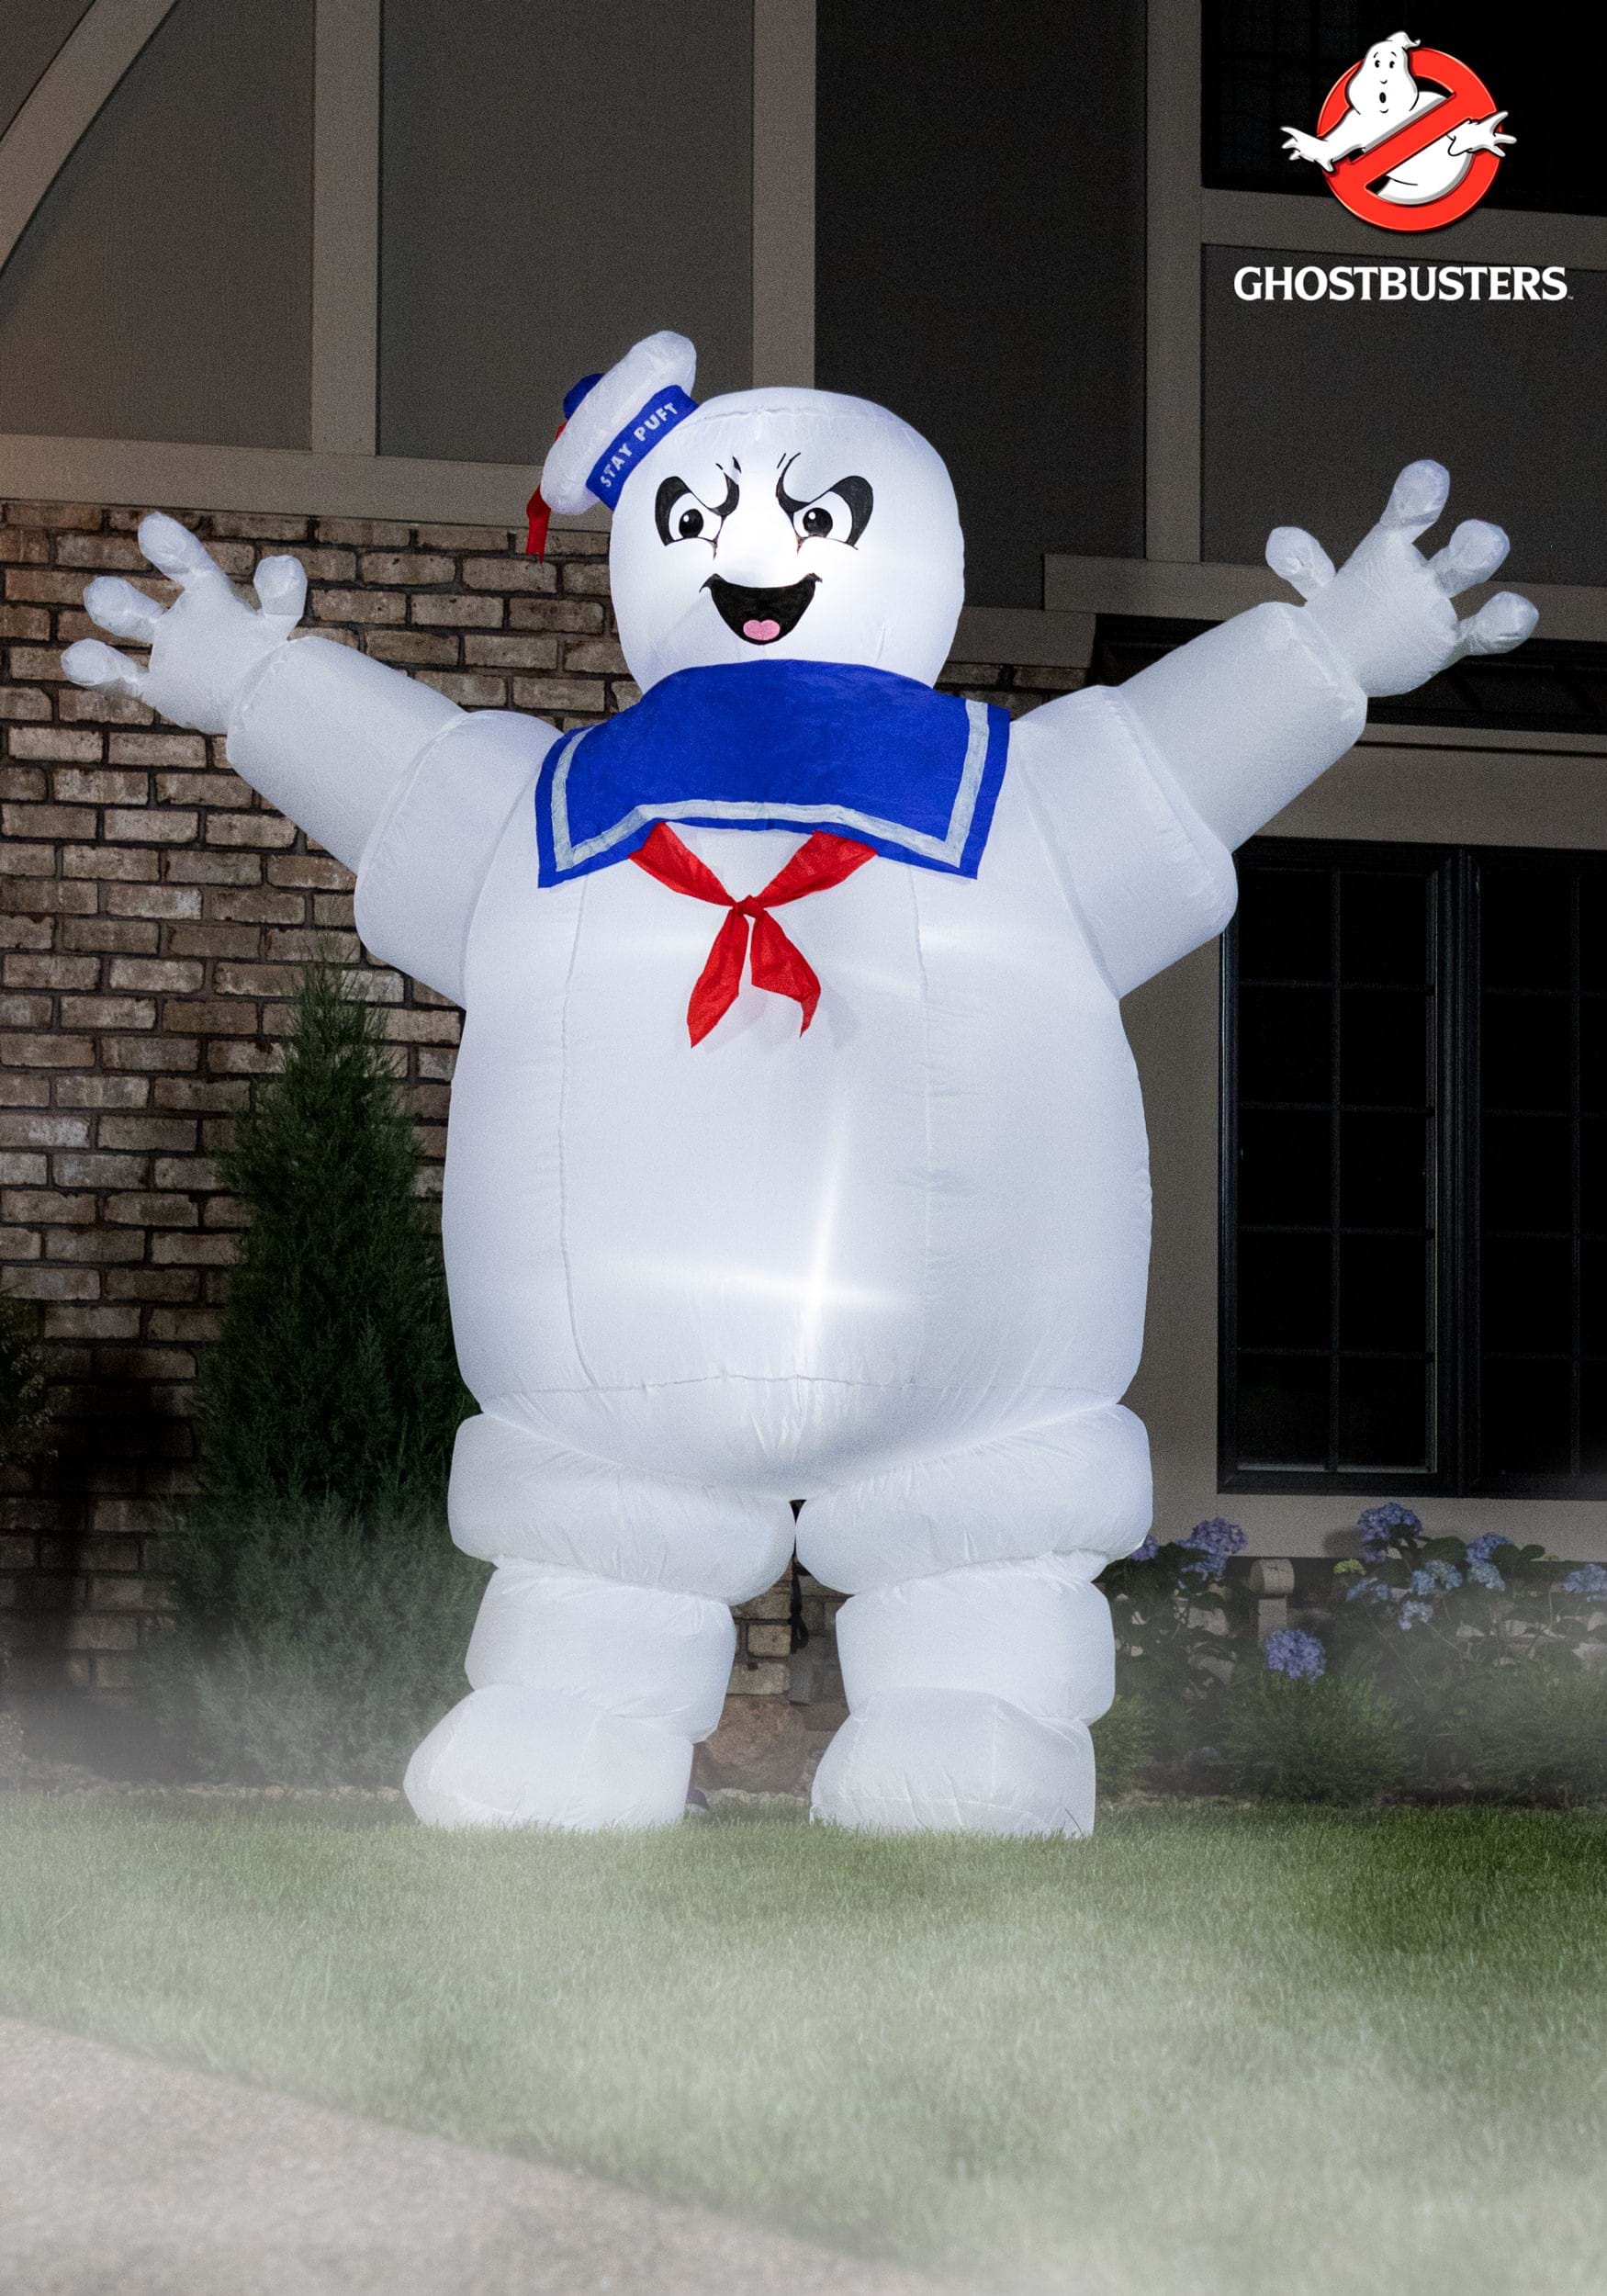 Ghostbusters 8FT Inflatable Stay Puft Marshmallow Man Decoration - Halloween Yard Decoration